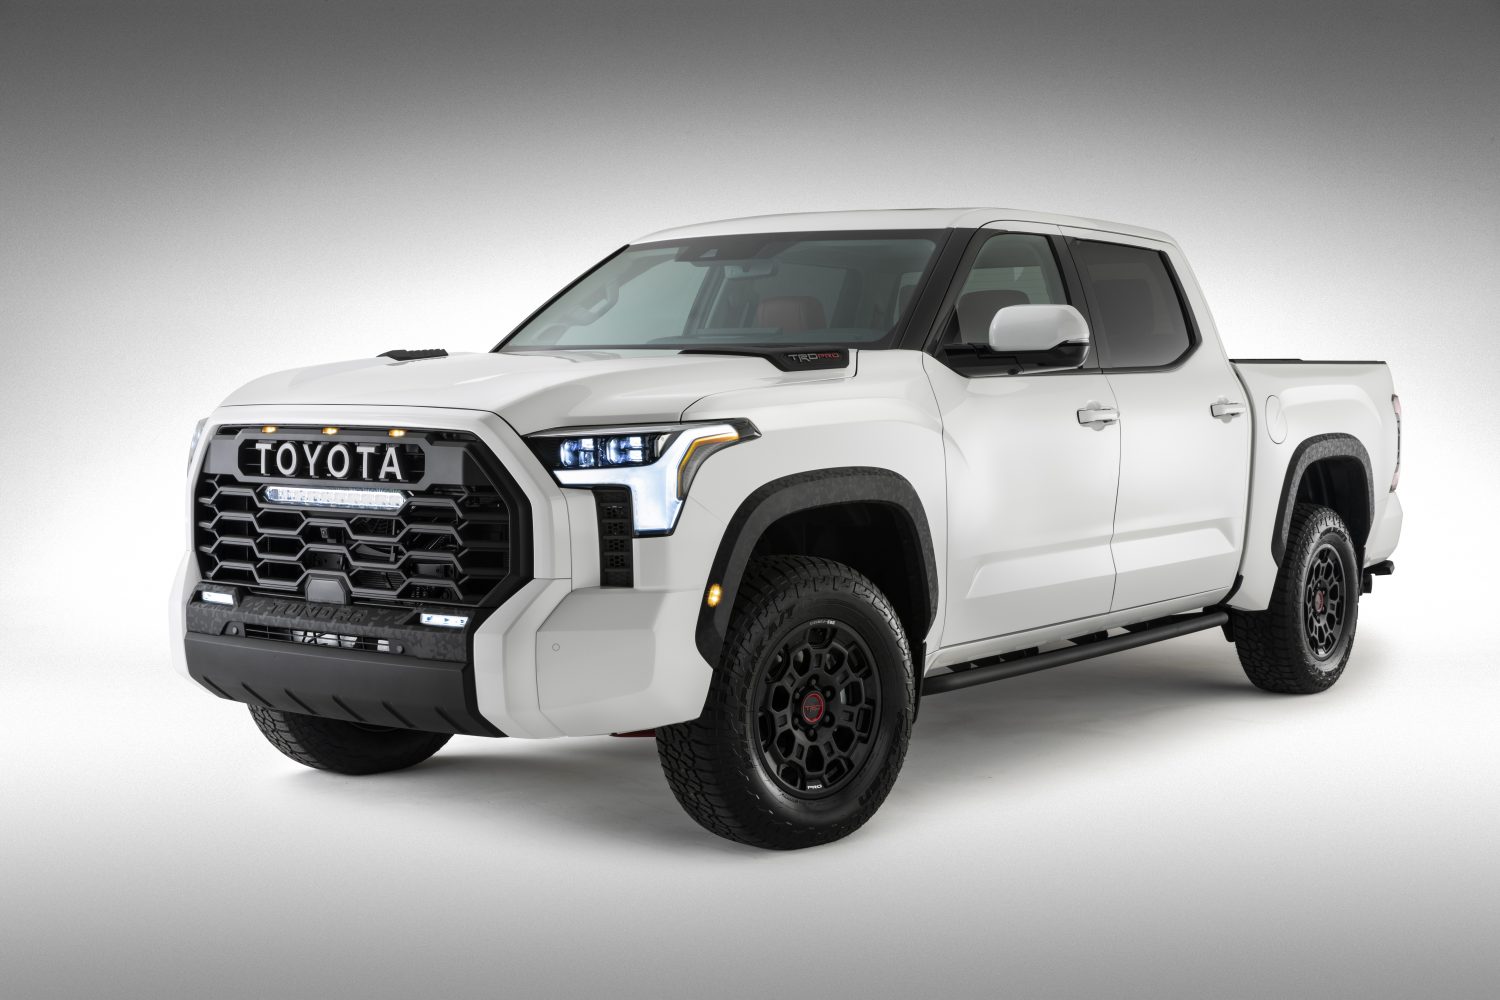 183New Look Cavalry blue toyota tundra for sale for wallpaper